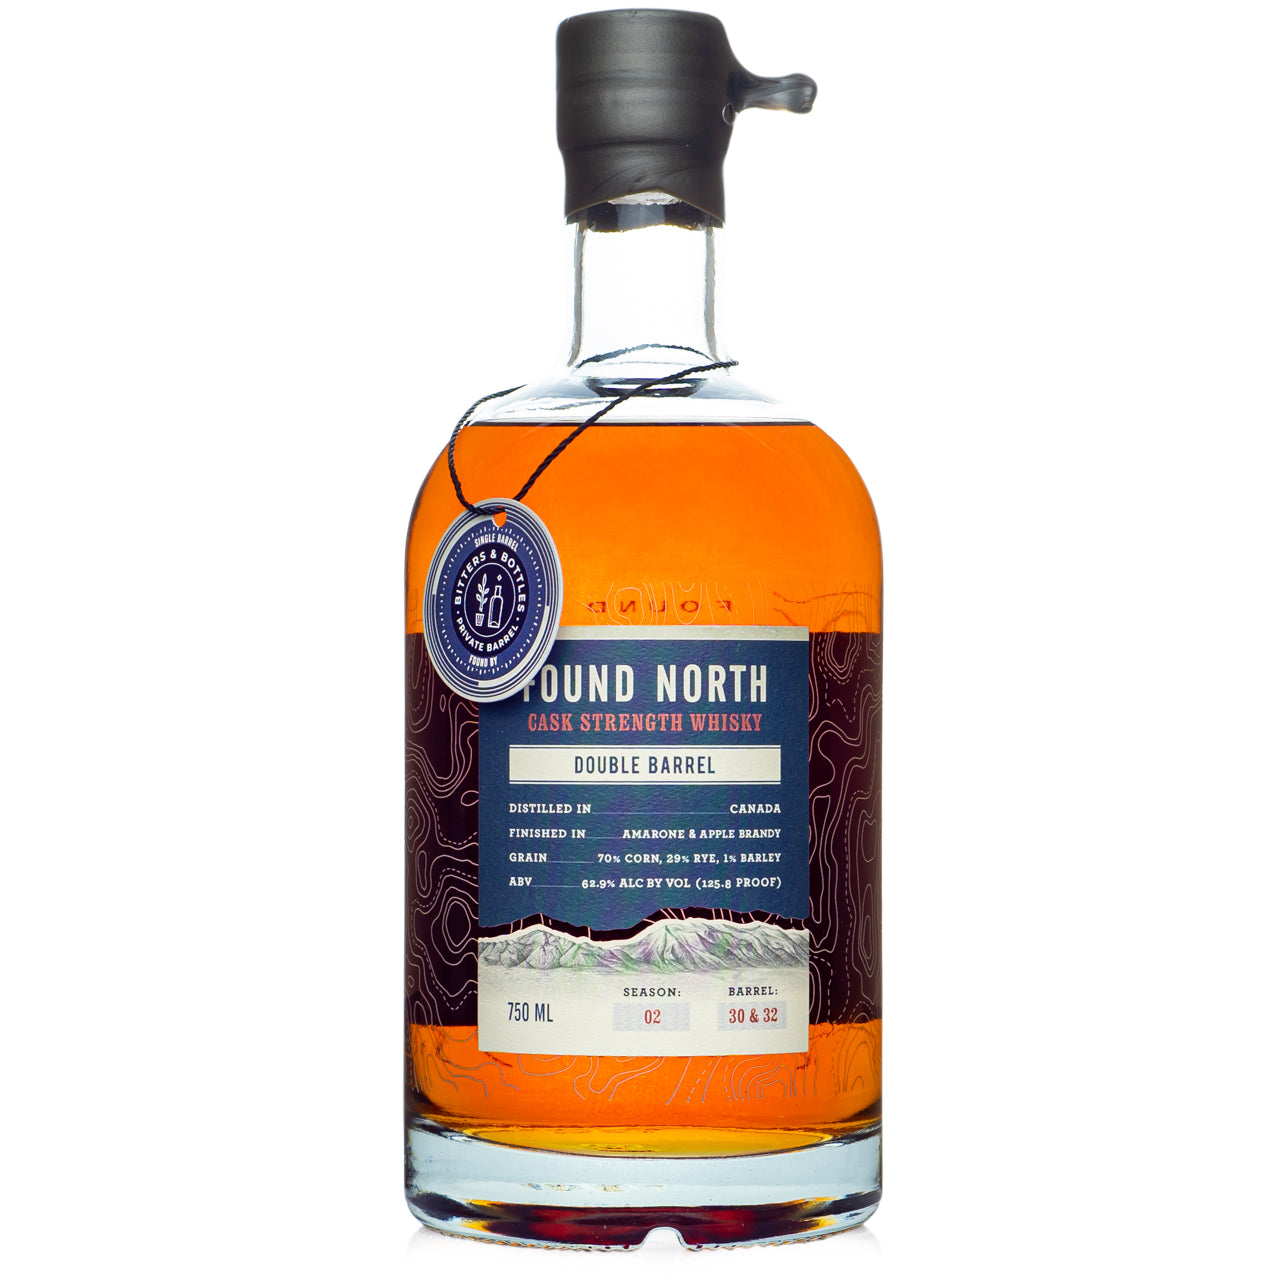 Found North Double Barrel S2 Cask Strength Whisky